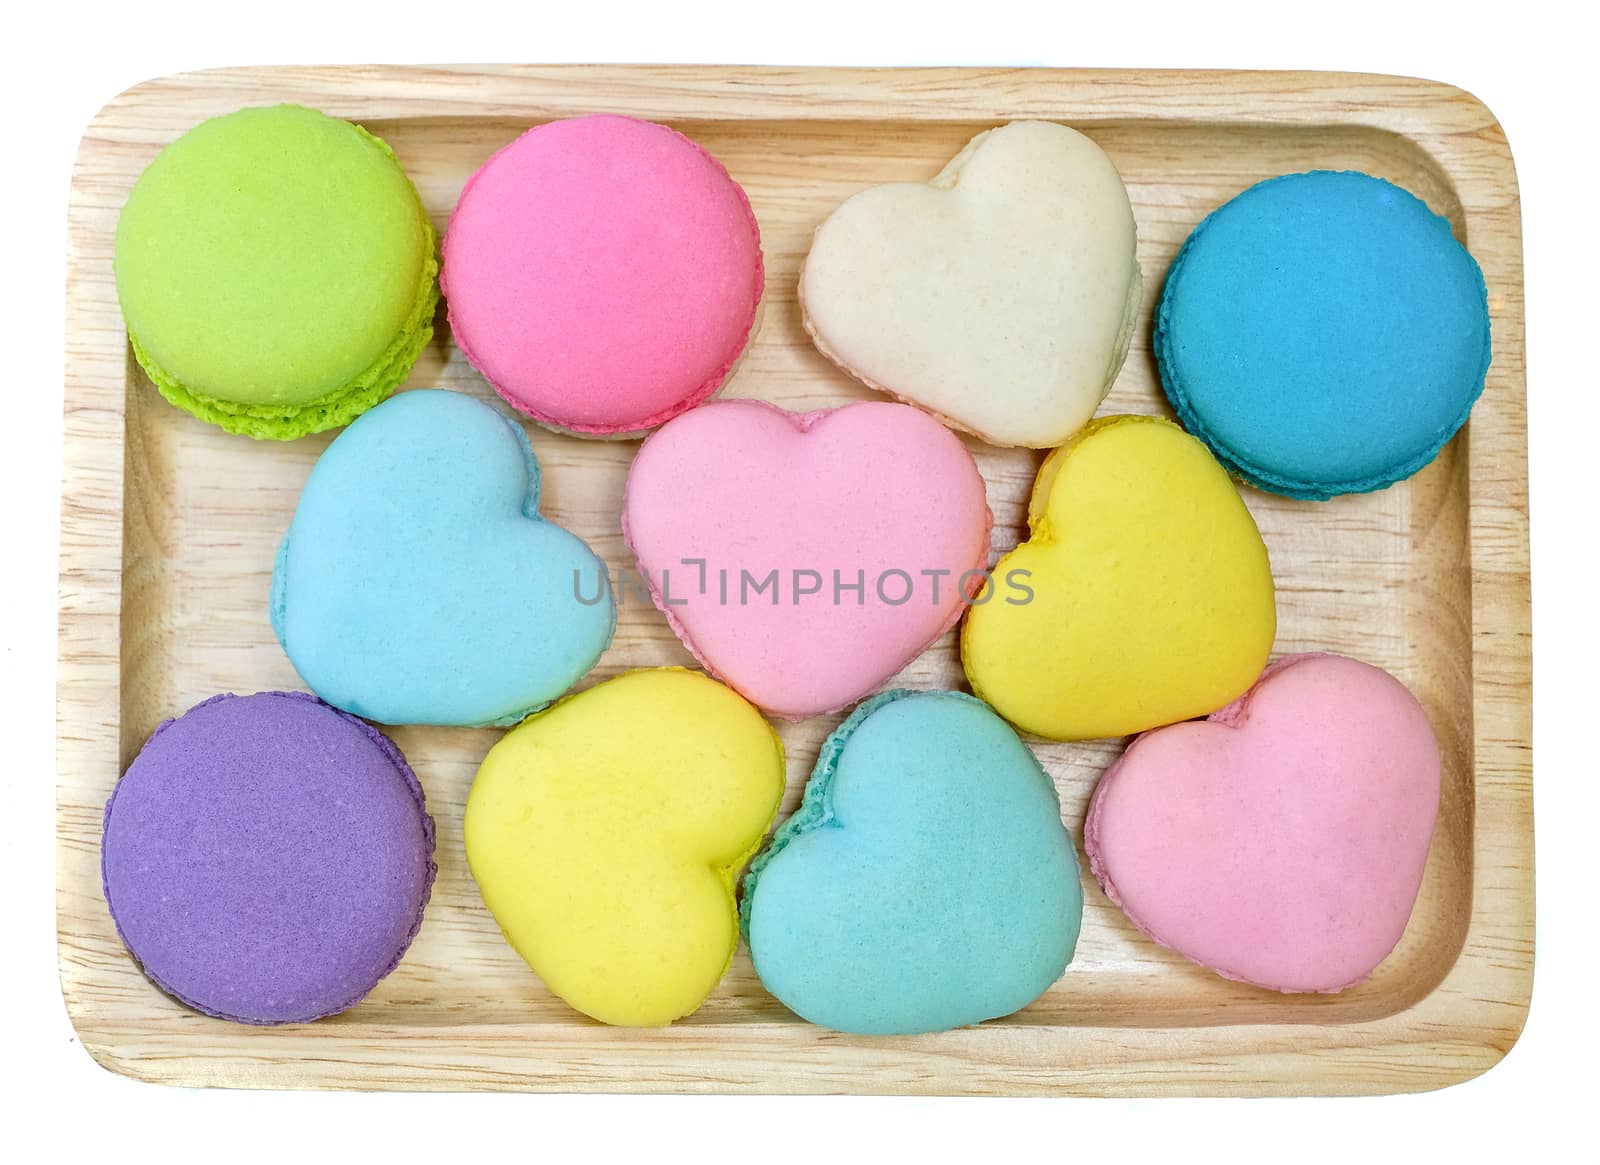 multi colored macaroons on a wooden trey, top view